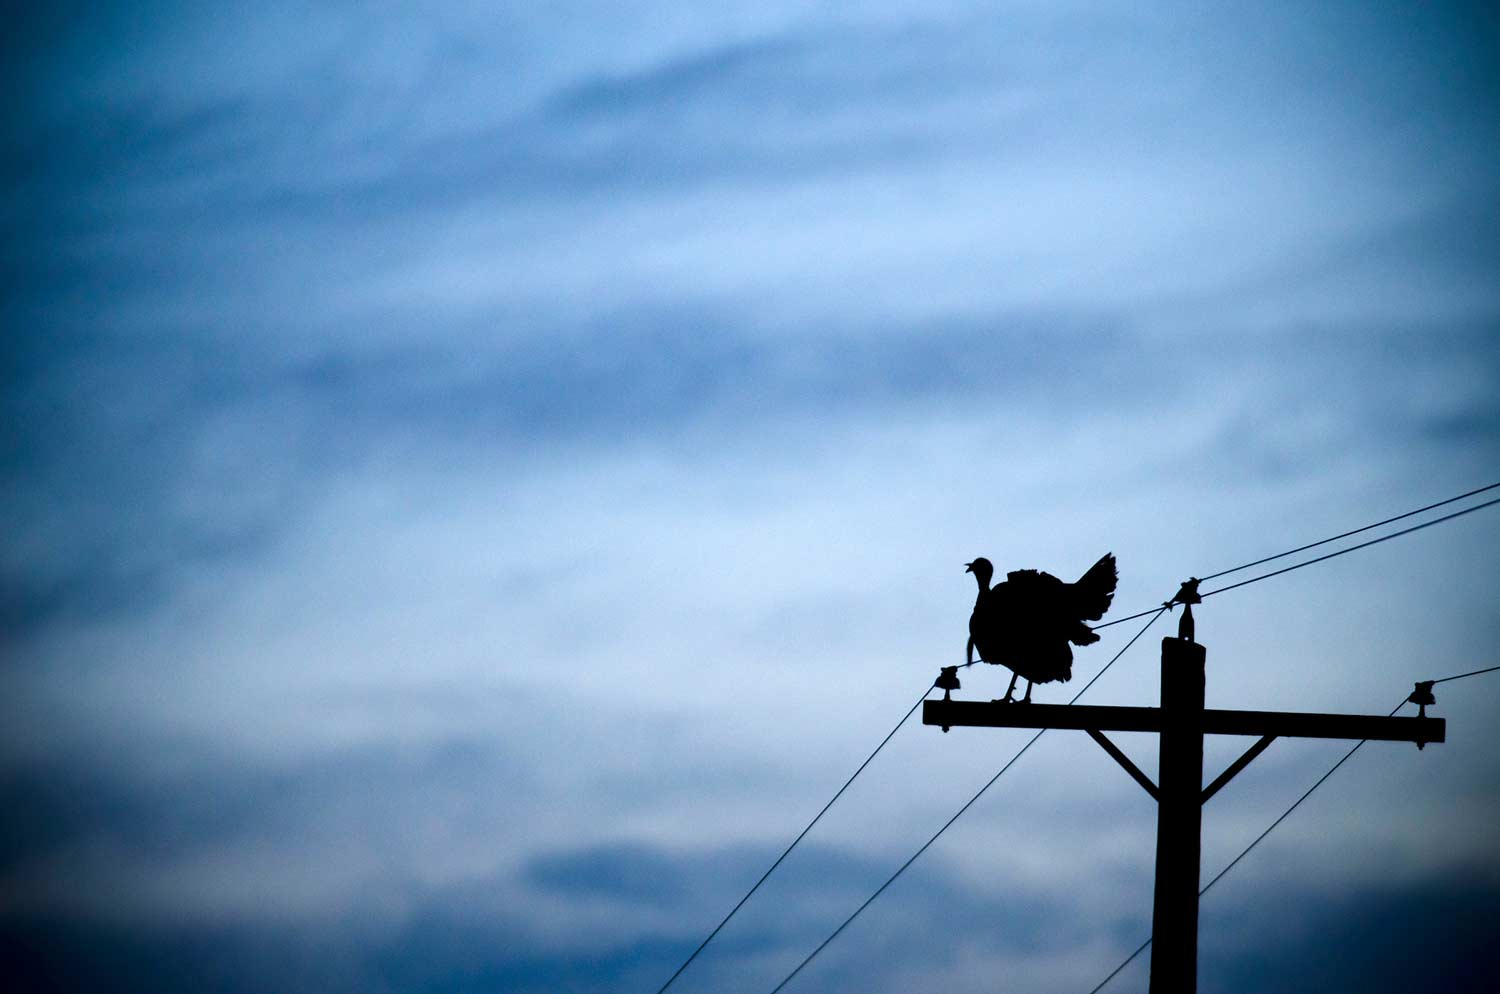 A wild turkey perched on a power line.